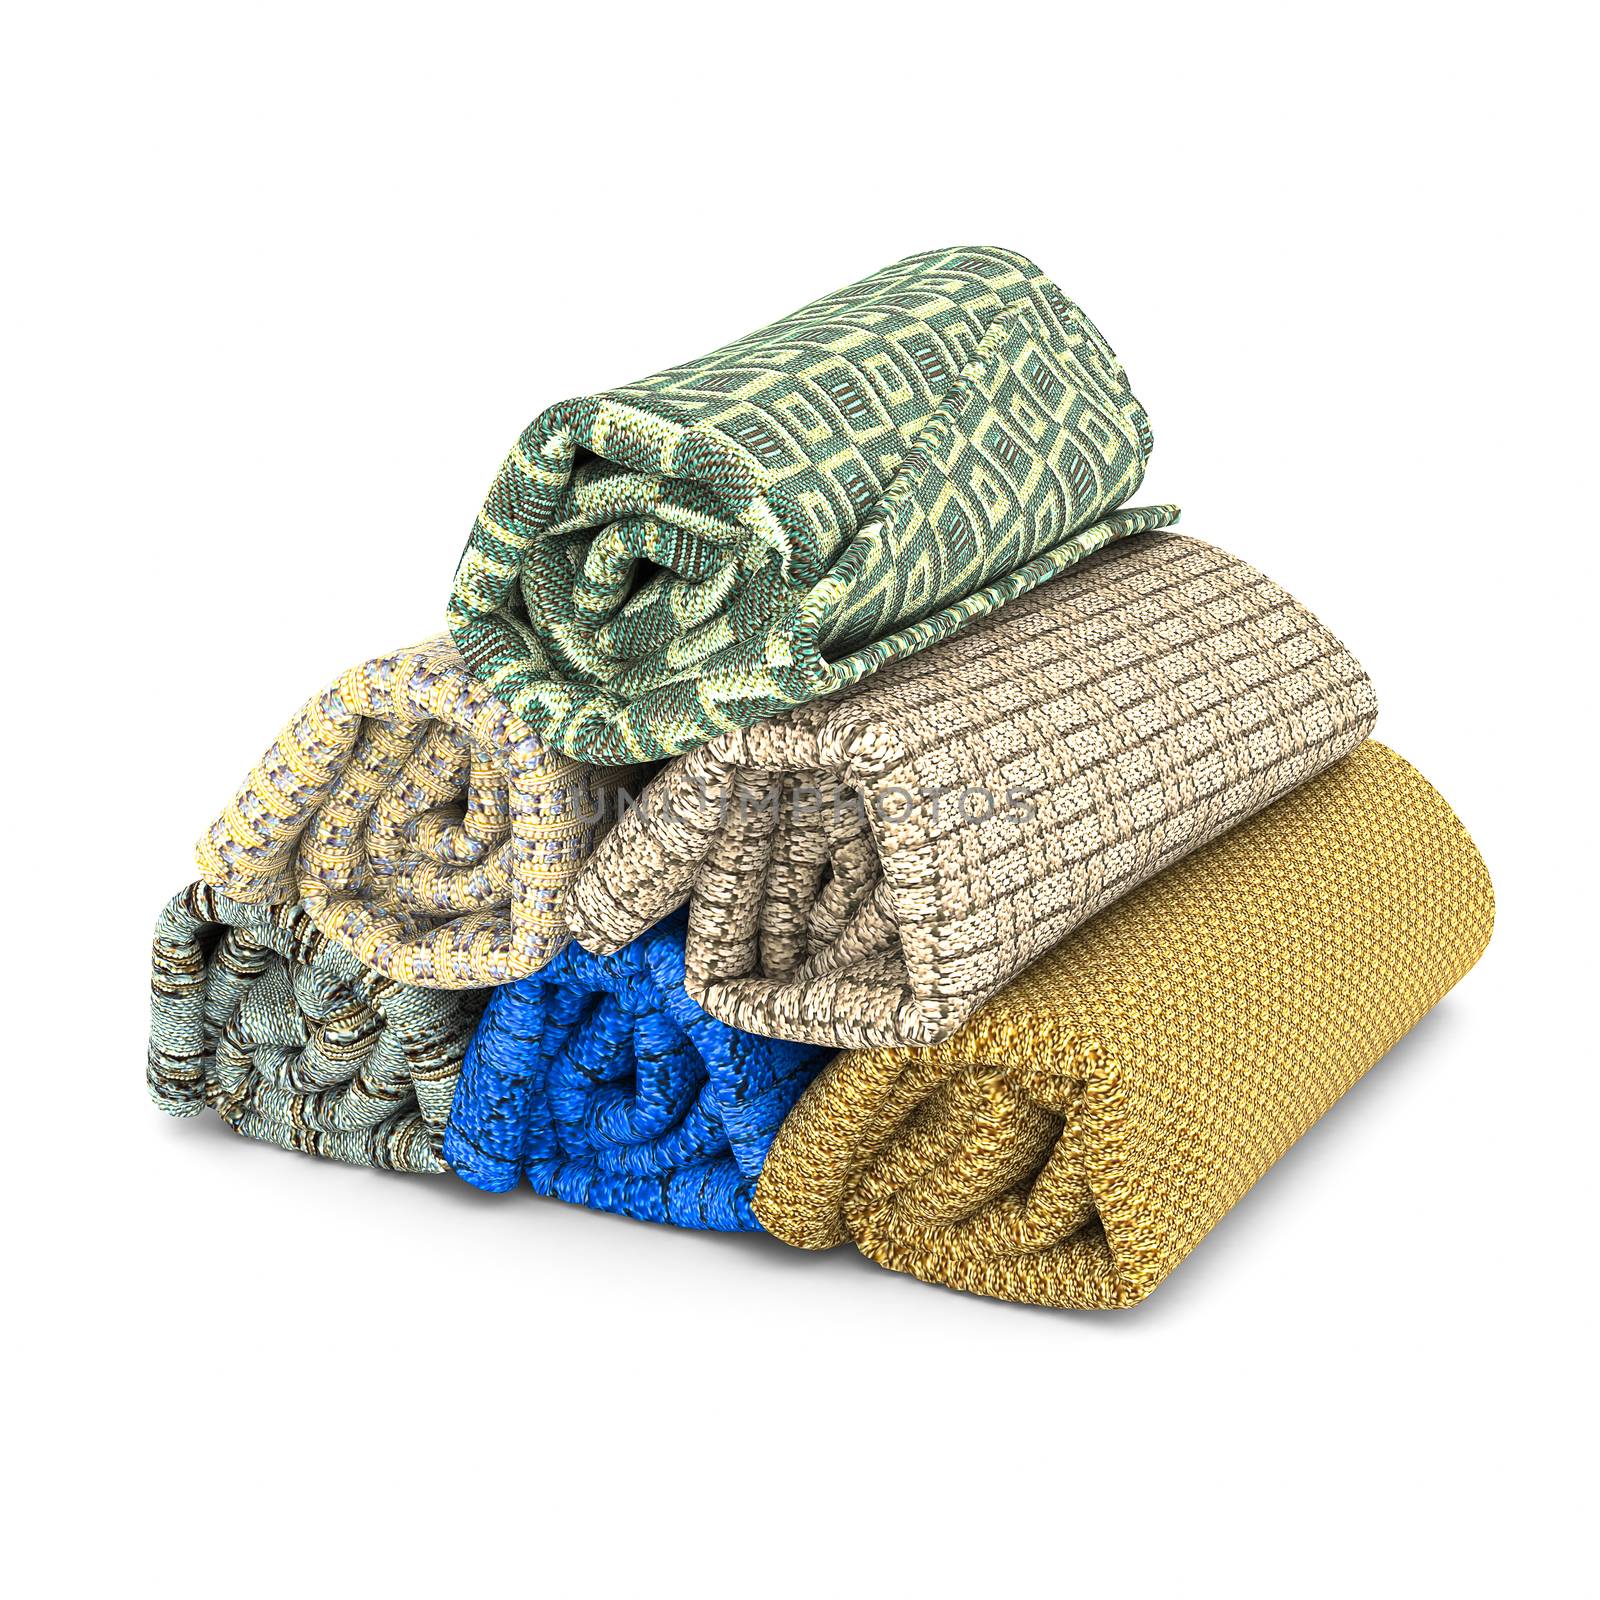 Stack of towels on a white background isolated